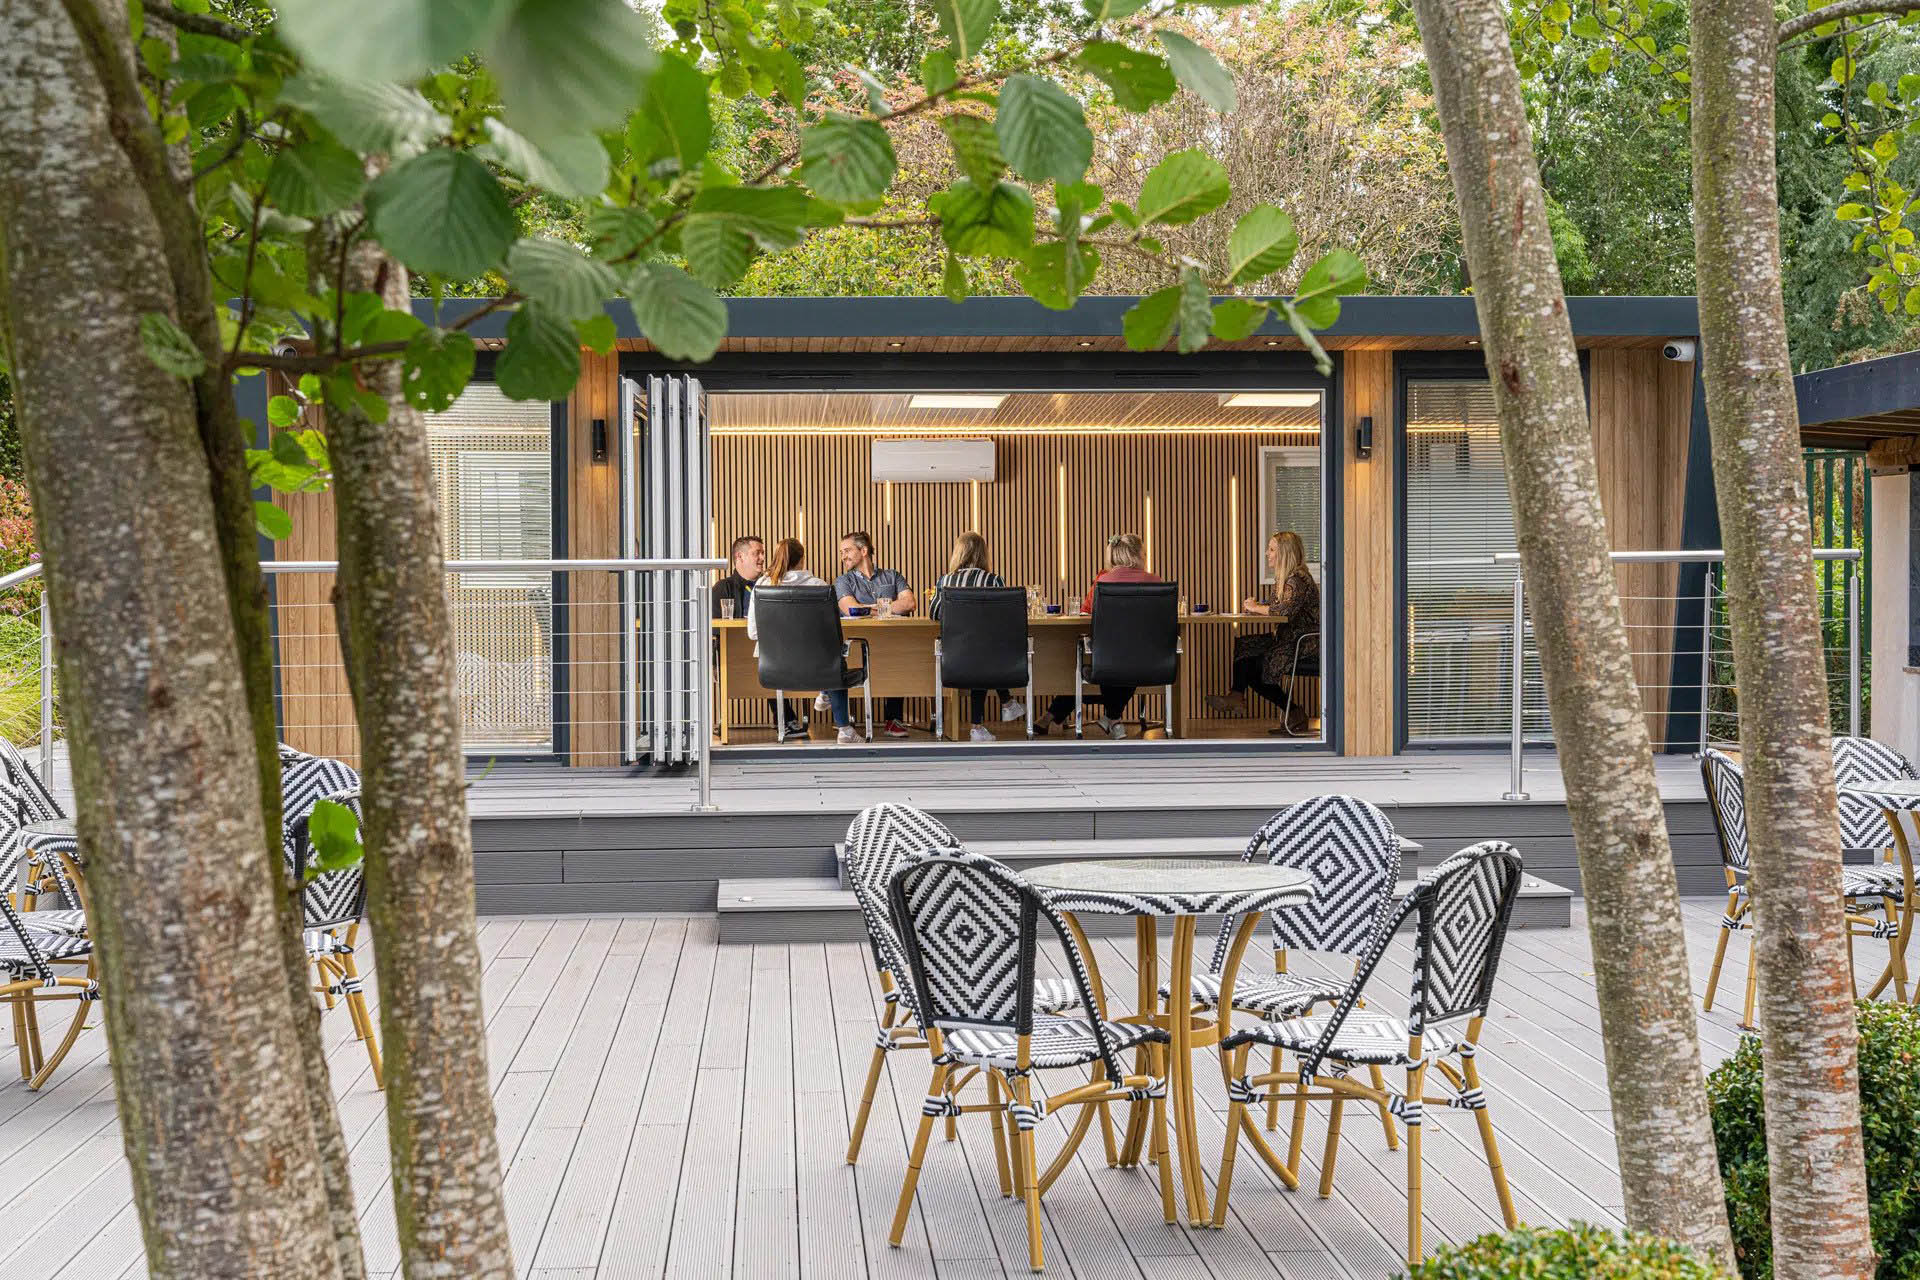 Exterior of a boardroom with people inside having a meeting. The building is on a raised patio and there is garden furniture outside